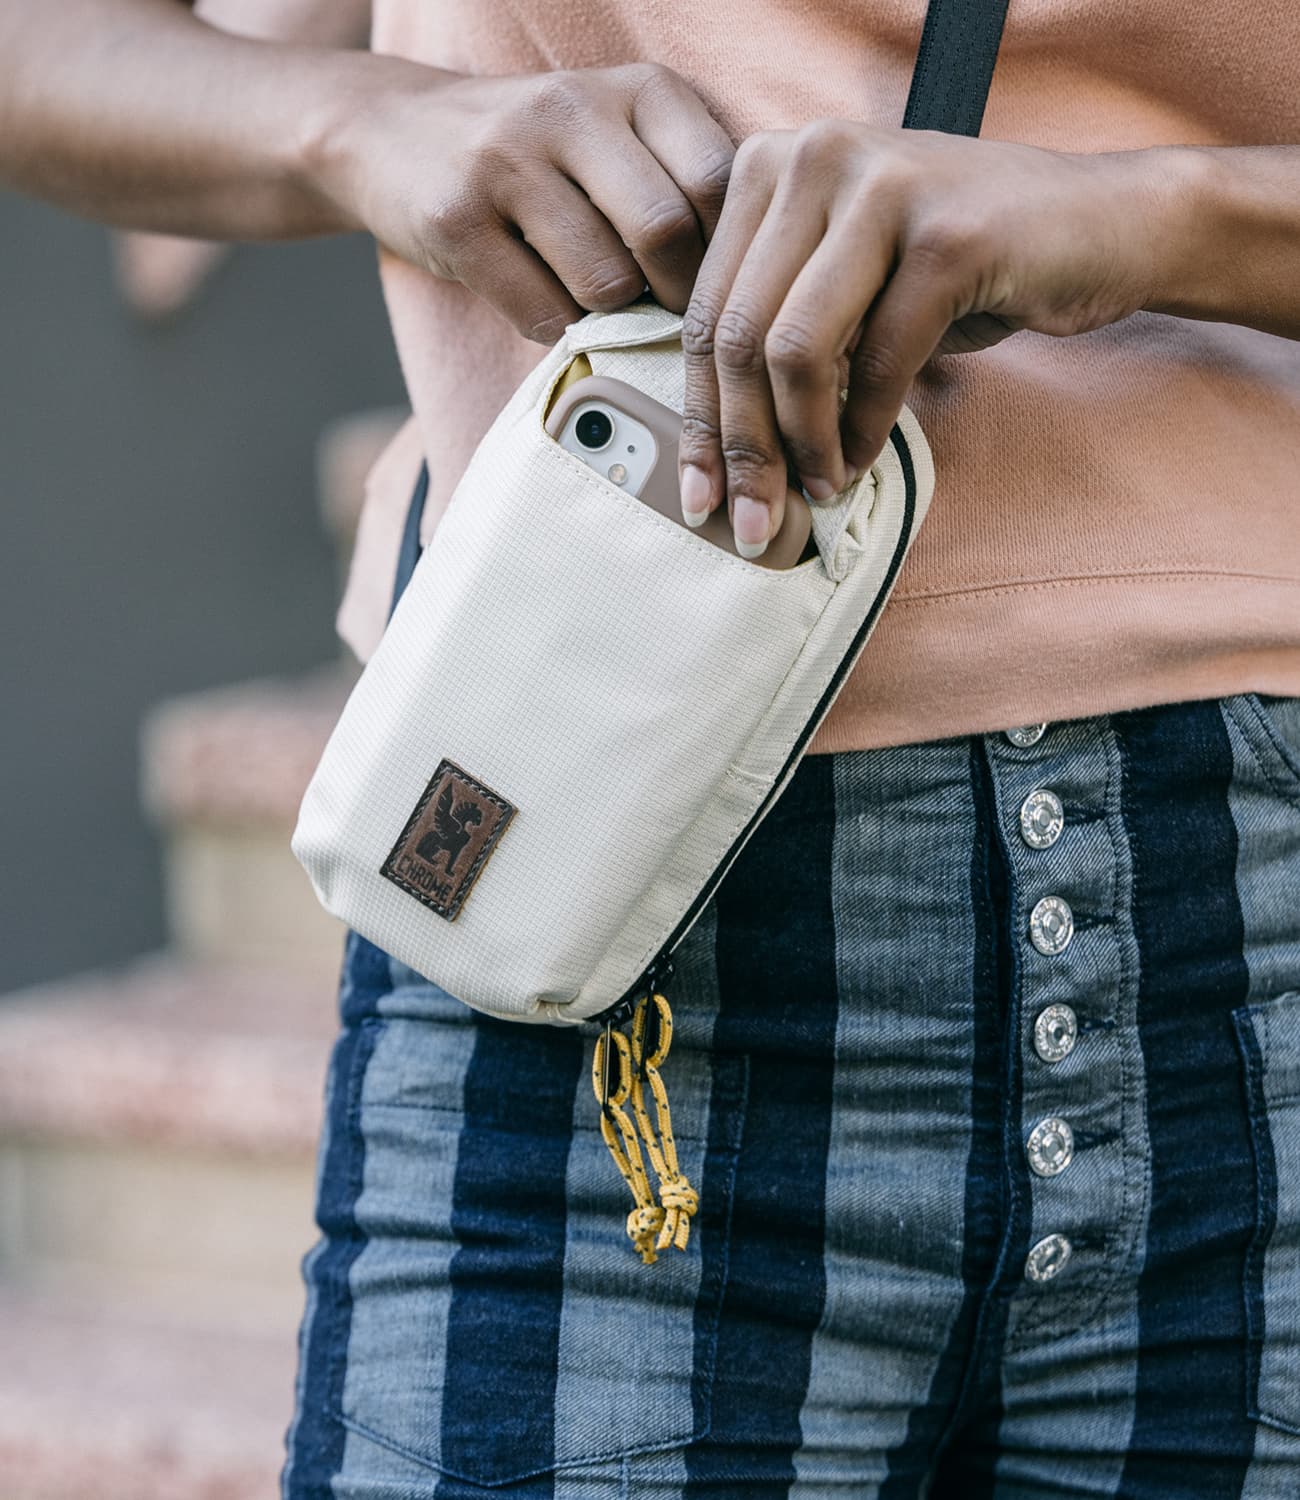 Ruckas Accessory pouch shown on a person stowing their phone